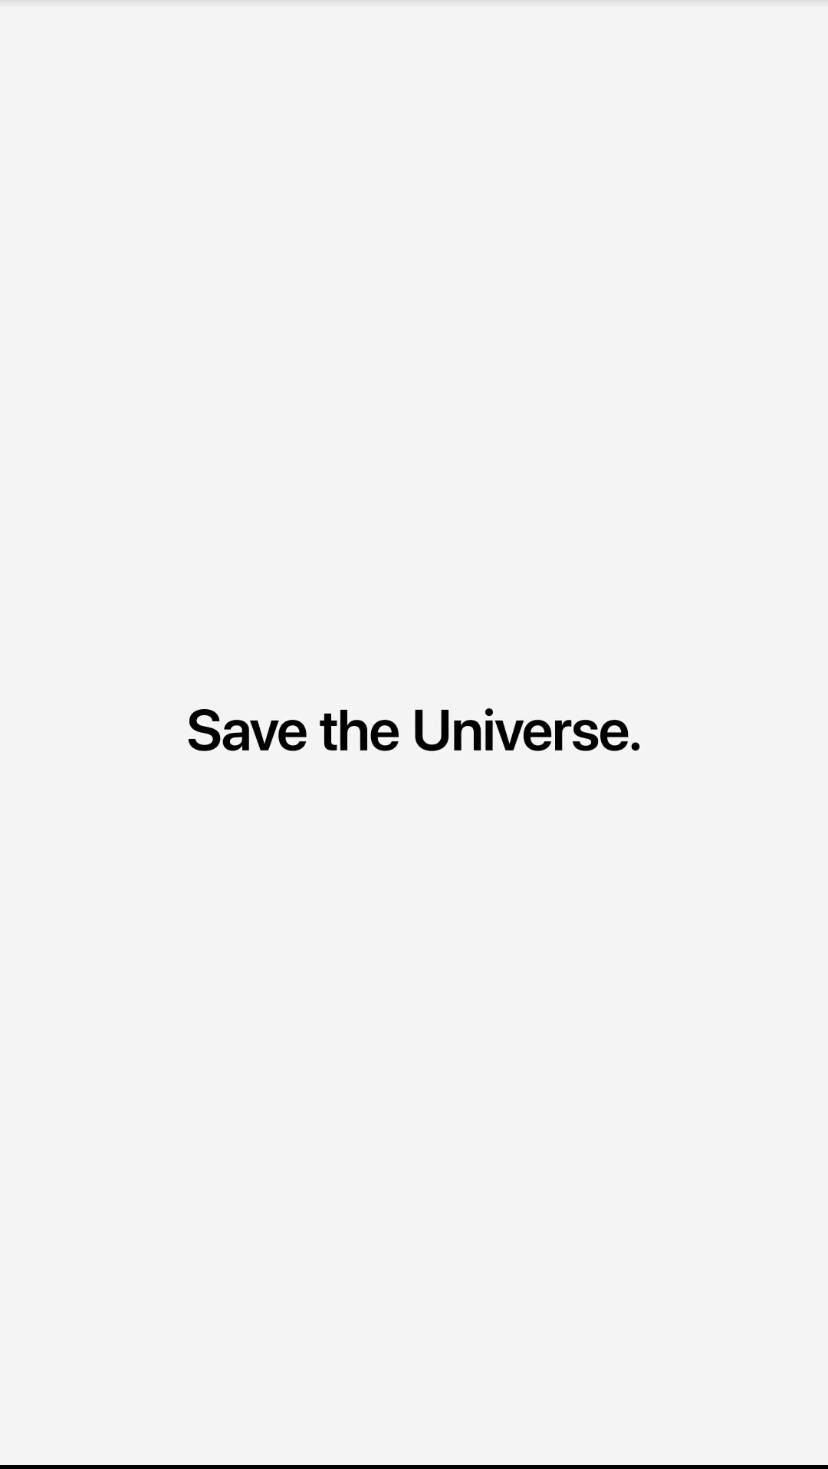 High Quality Save the universe Blank Meme Template